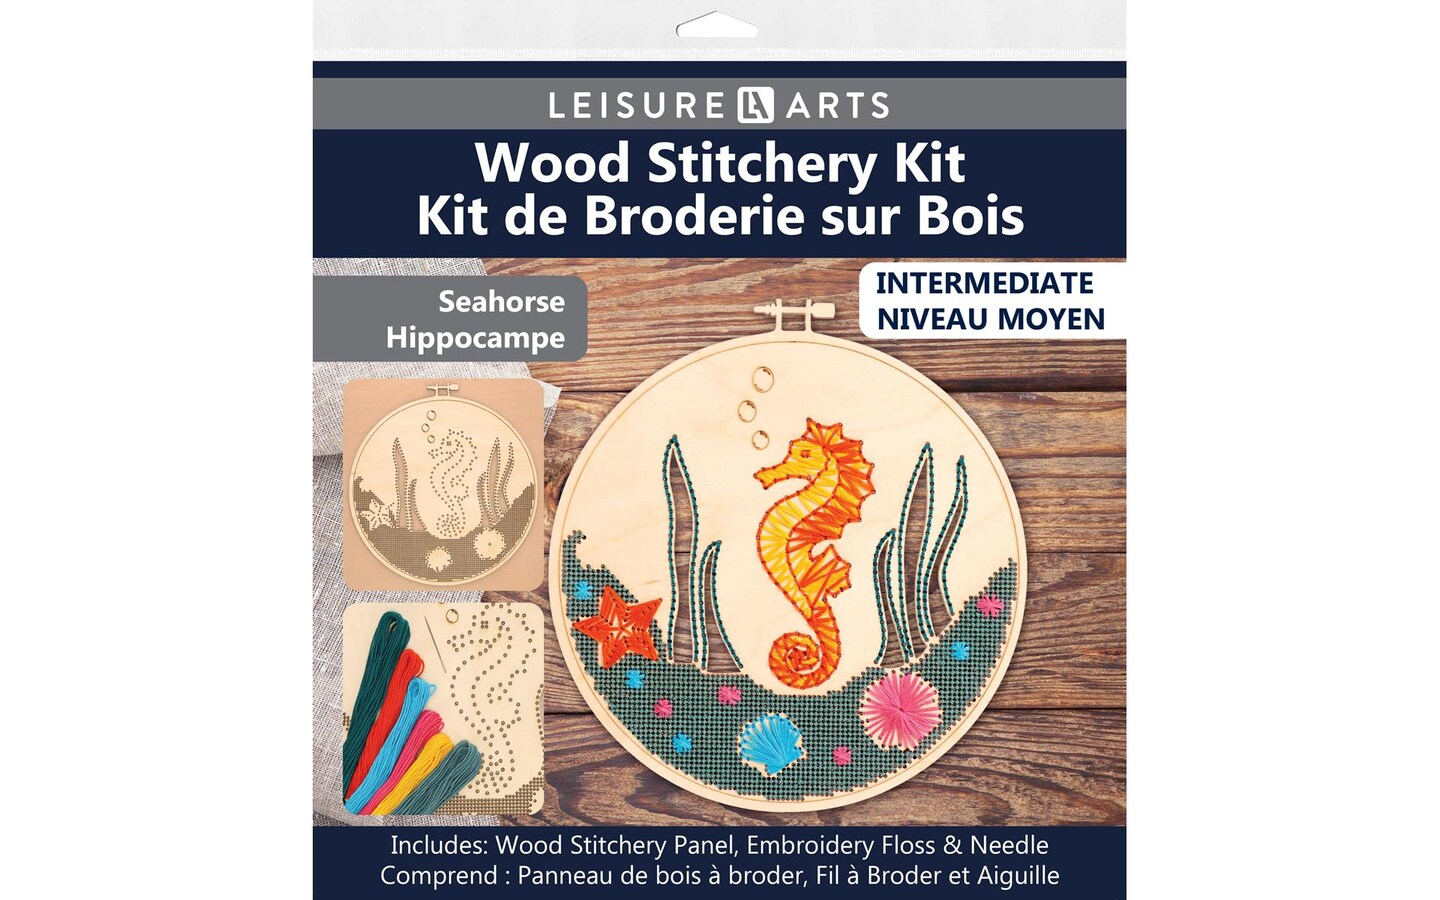 Craft Kits for Teens